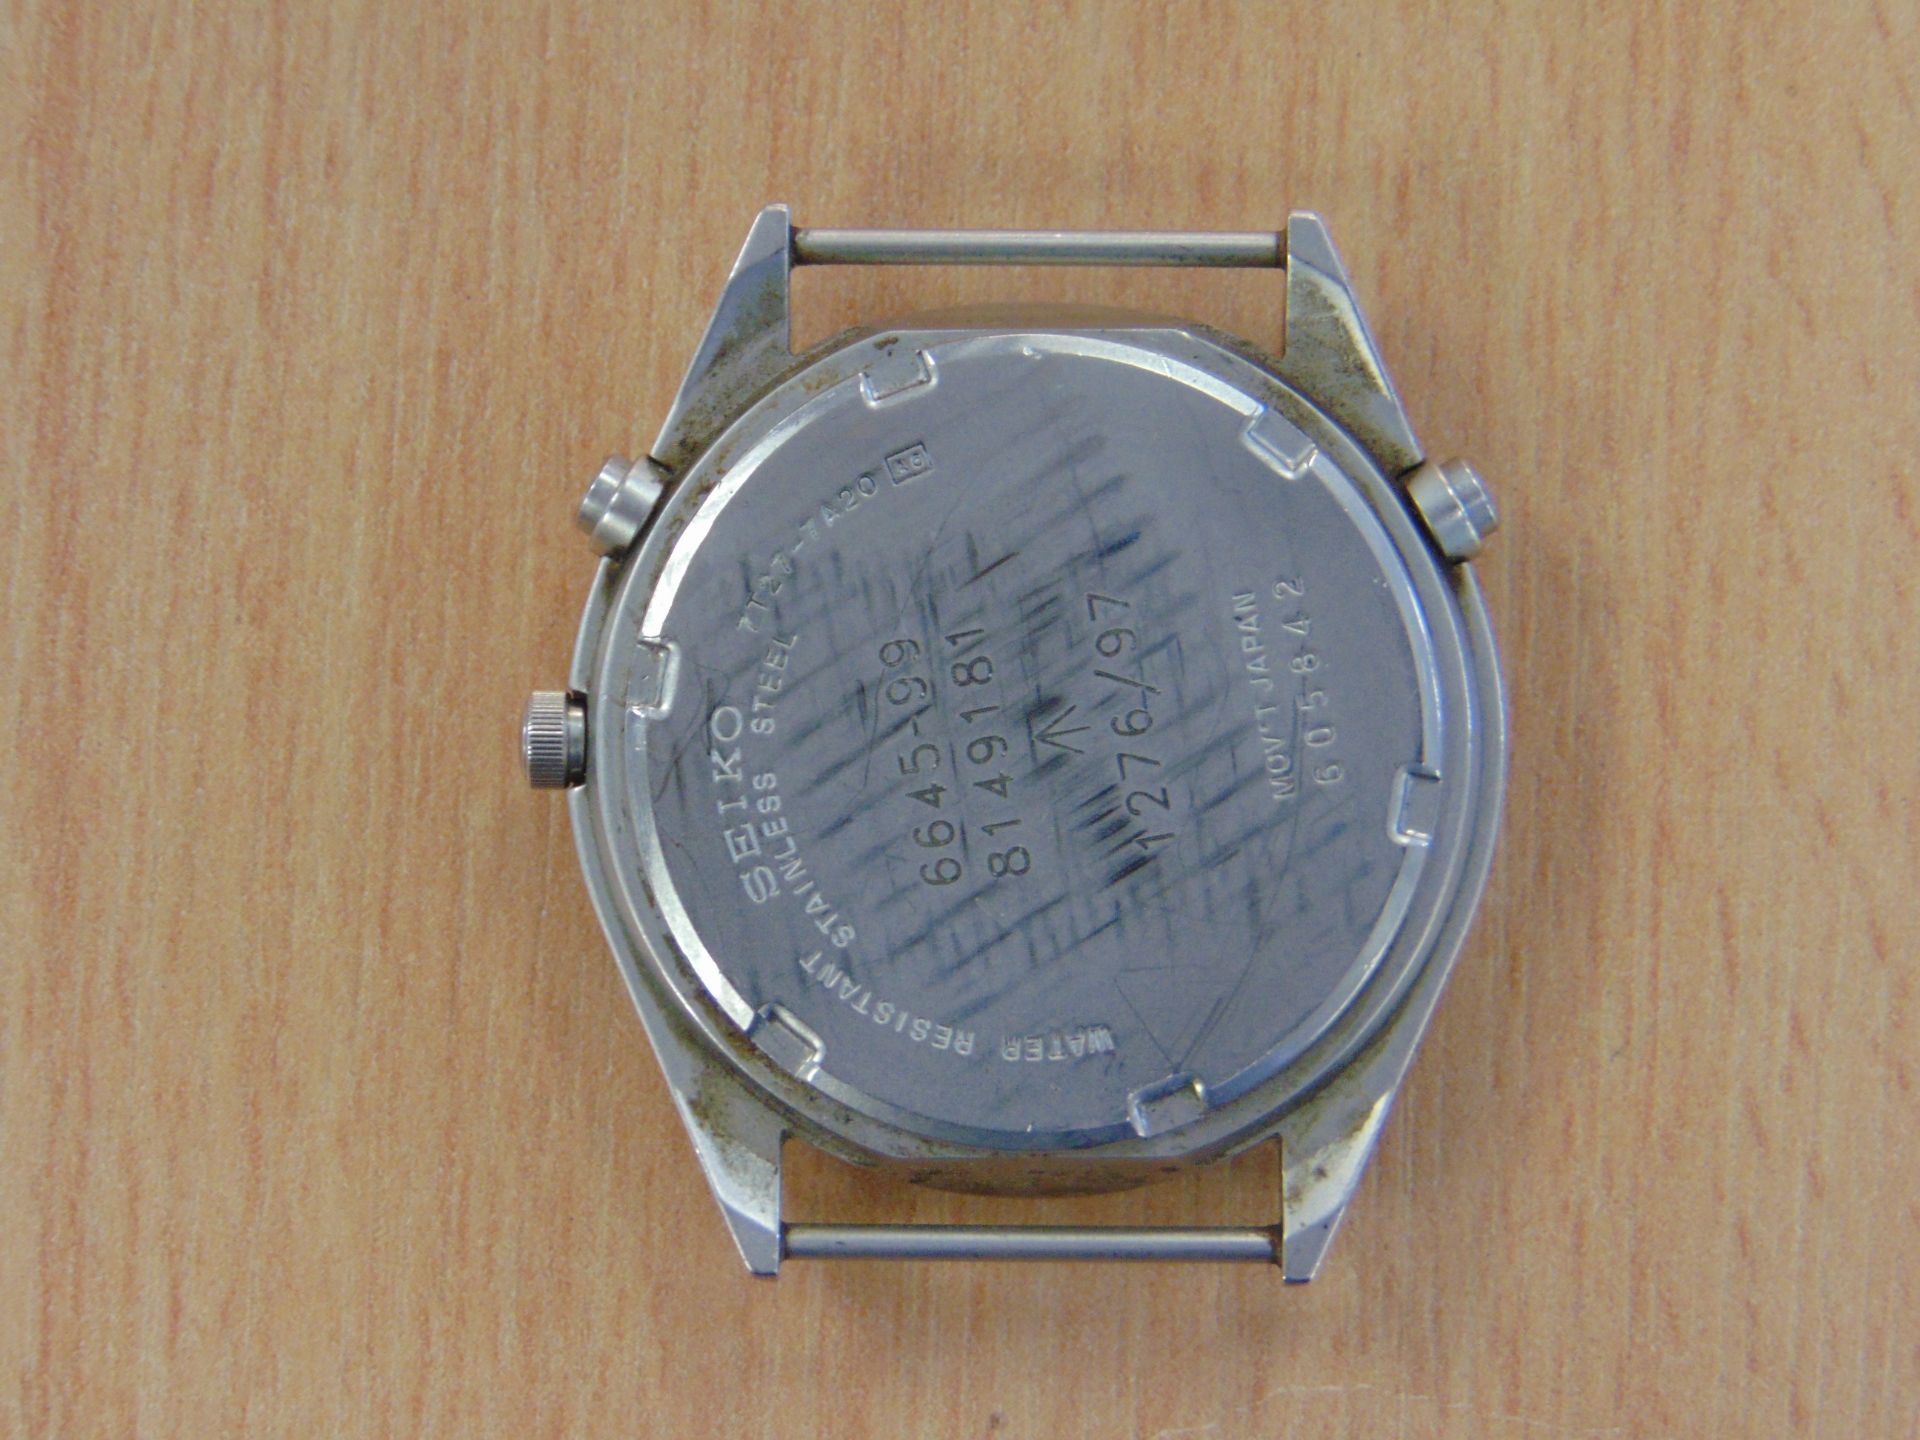 SEIKO GEN 2 RAF ISSUE PILOTS CHRONO WATCH NATO MARKINGS DATED 1997 - Image 5 of 9